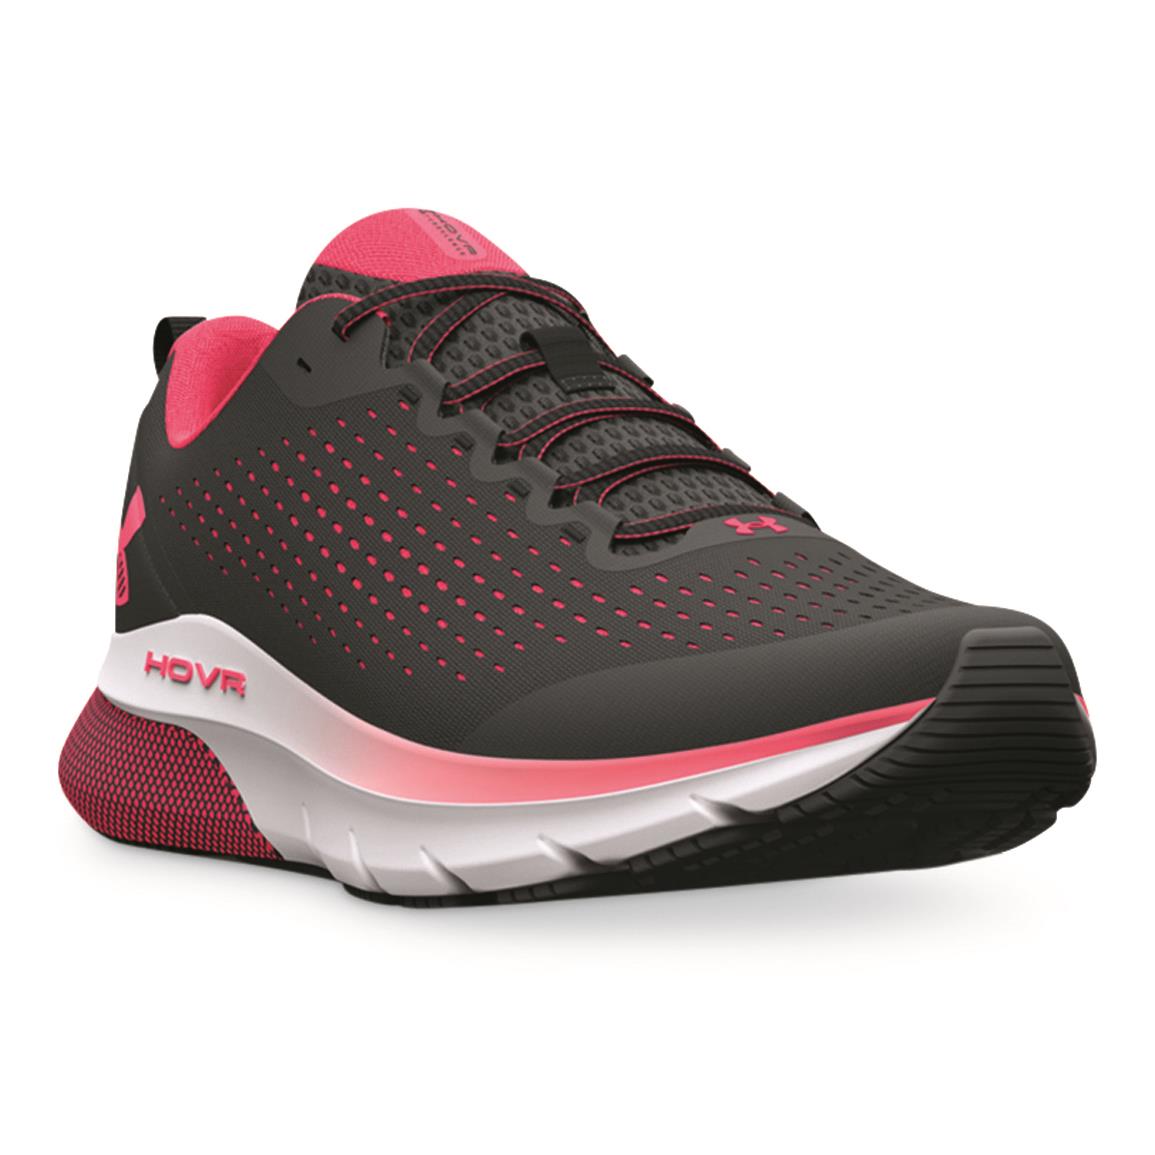 Under Armour Women's HOVR Turbulence Running Shoes, Black/pink Shock/pink Shock